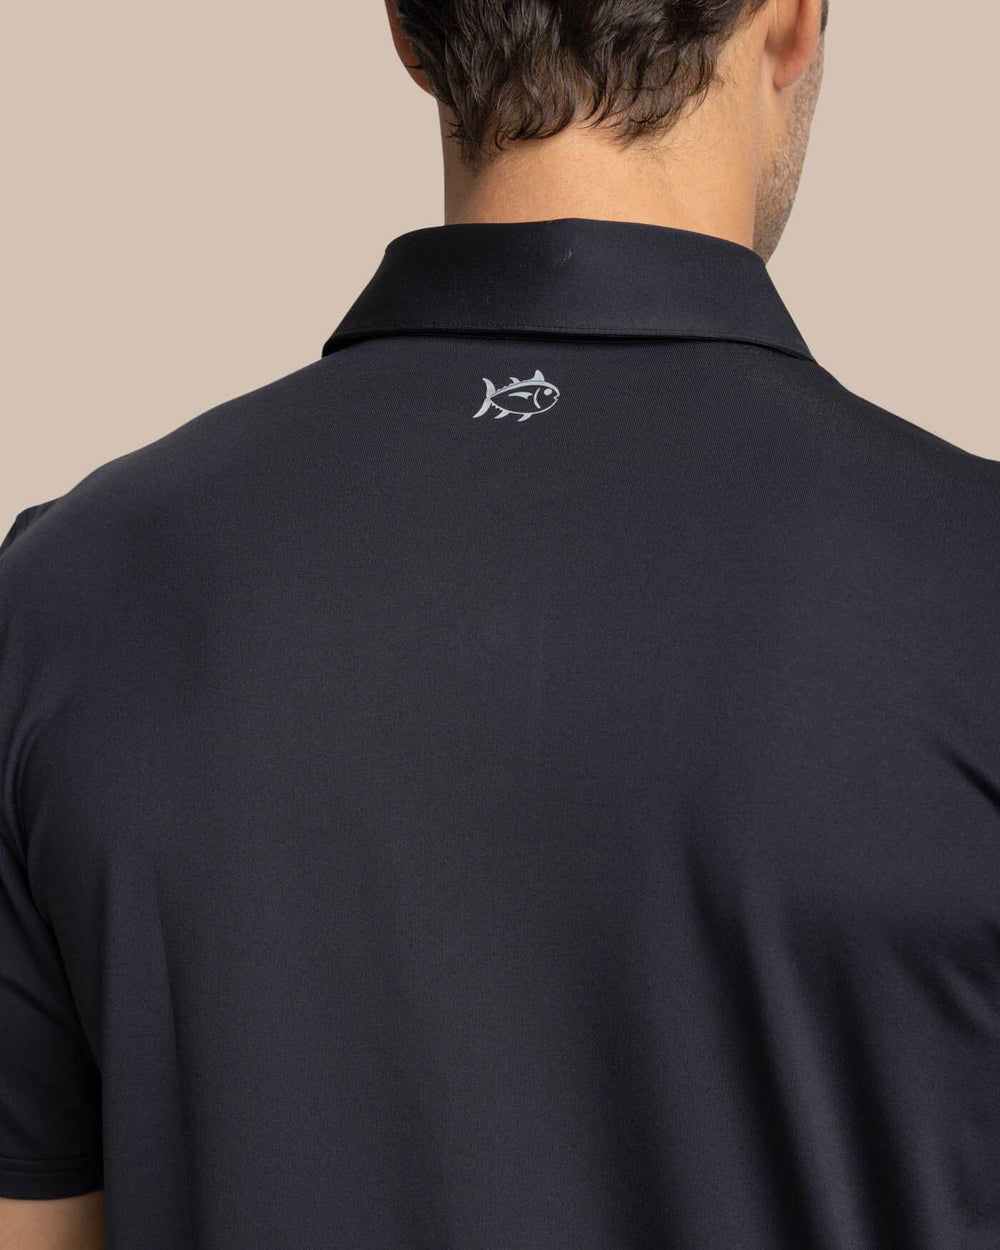 The detail view of the Southern Tide Brenton Chest Stripe Performance Polo by Southern Tide - Black